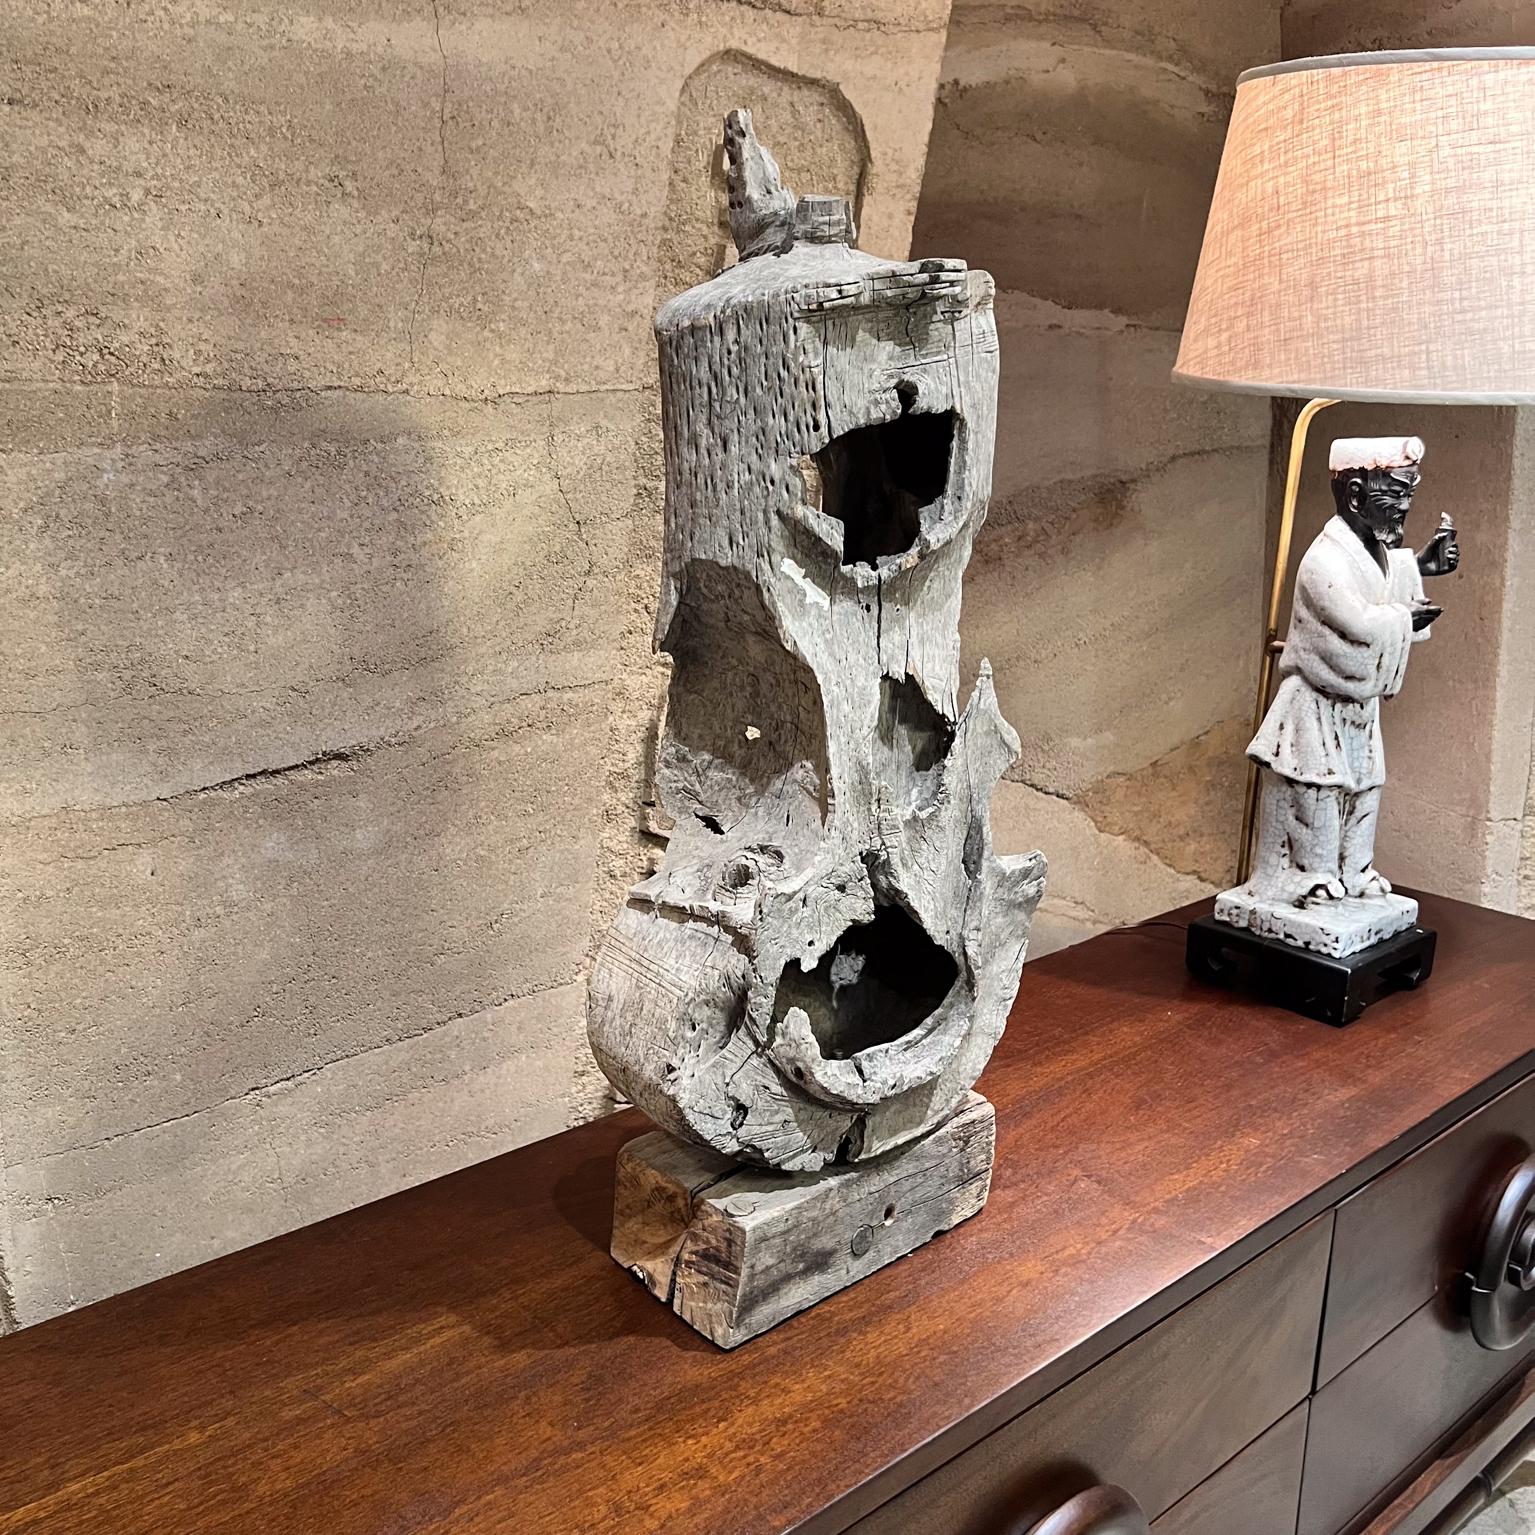 1950s Abstract Mesquite Wood Sculpture Mexico
Unsigned. In the style of Mathias Goeritz.
33 h x 6.5d x 13 w
Original vintage unrestored condition.
Original patina.
Refer to images.